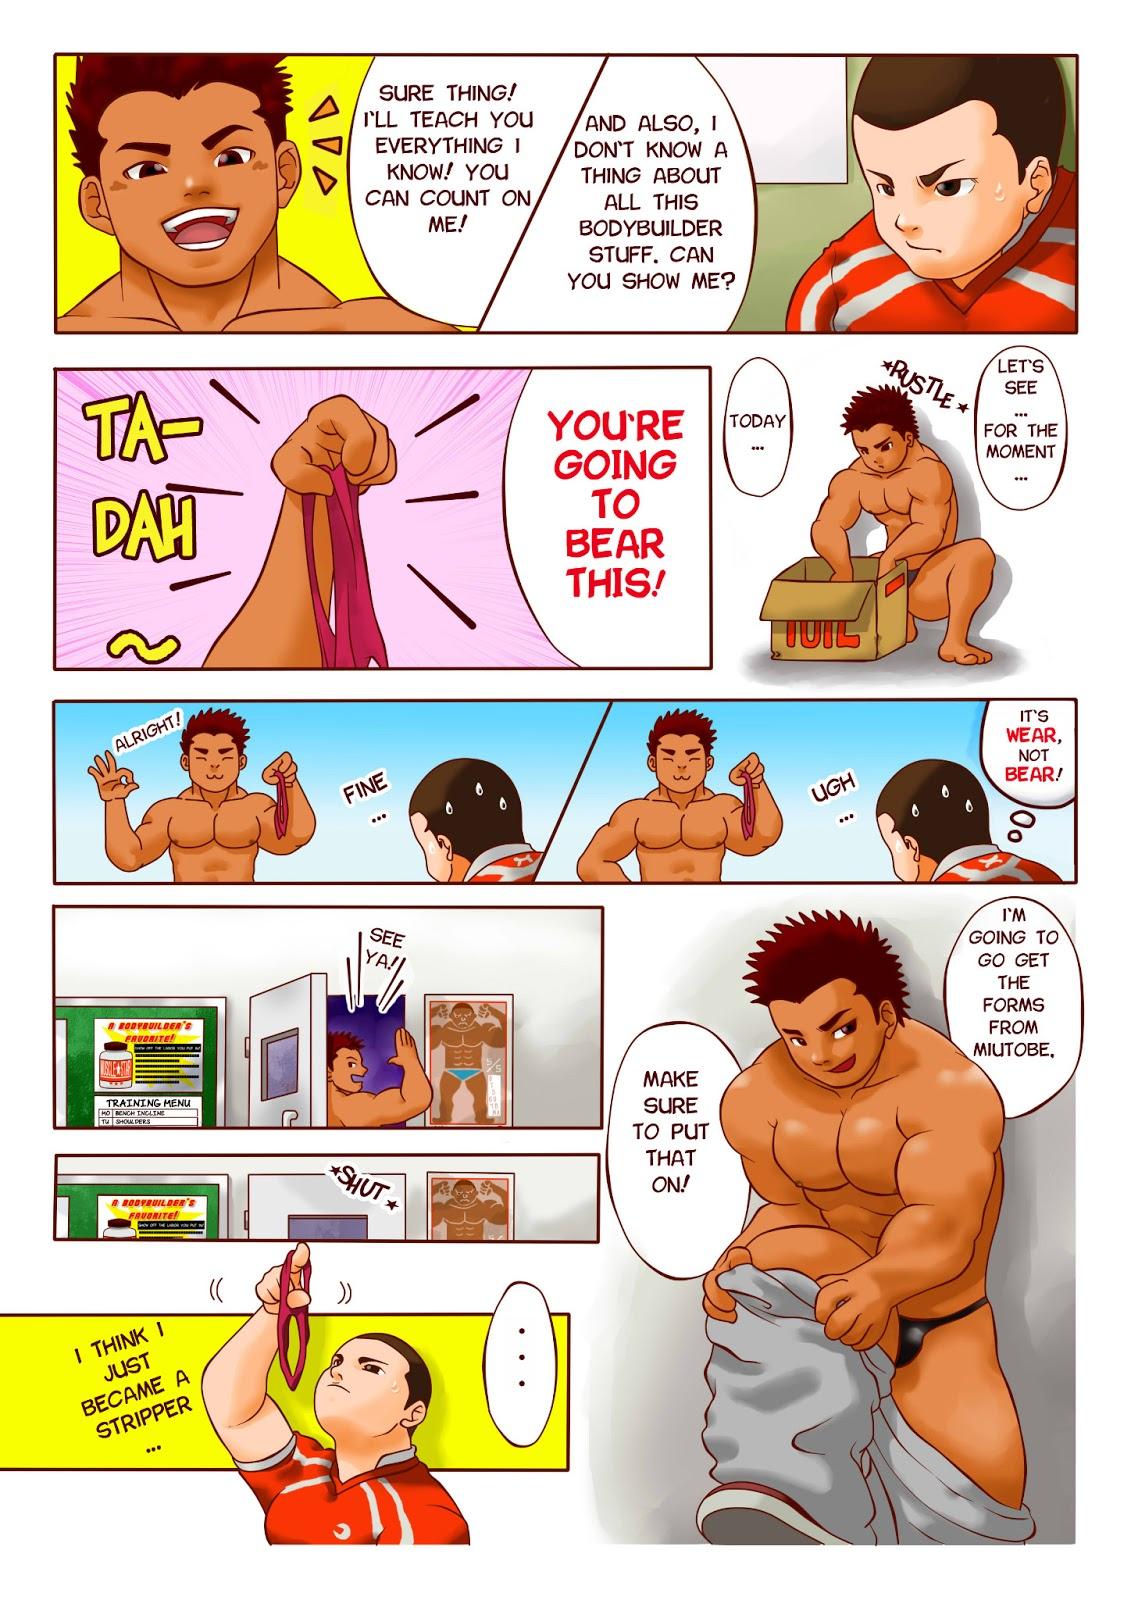 Suck Cock ピョン [Pyon] Rugby x Building part 1 English (in progress) Special Locations - Page 9